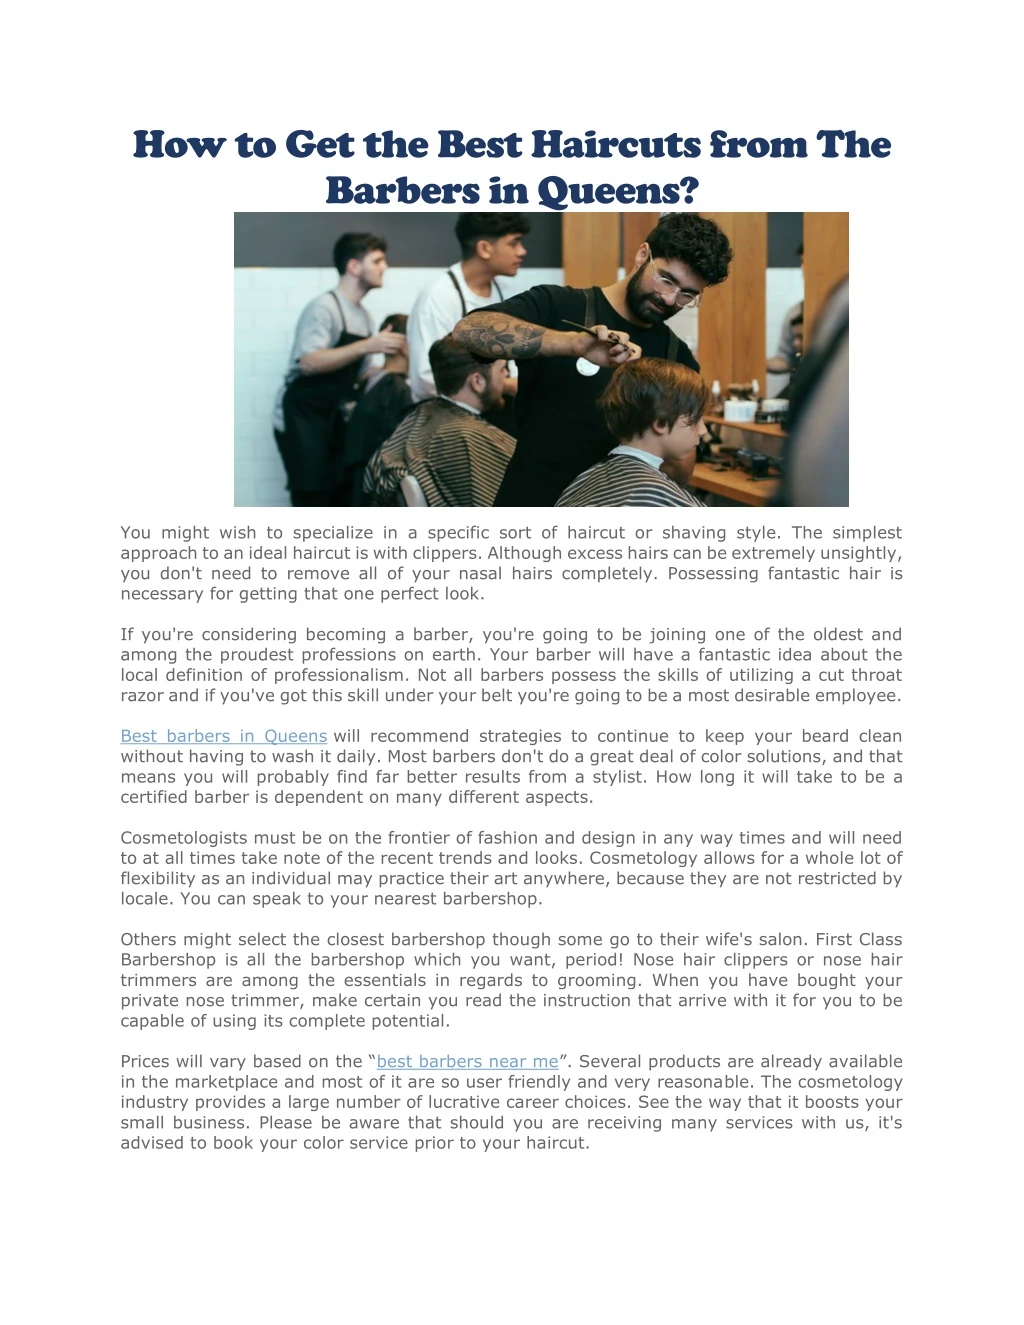 how to get the best haircuts from the barbers